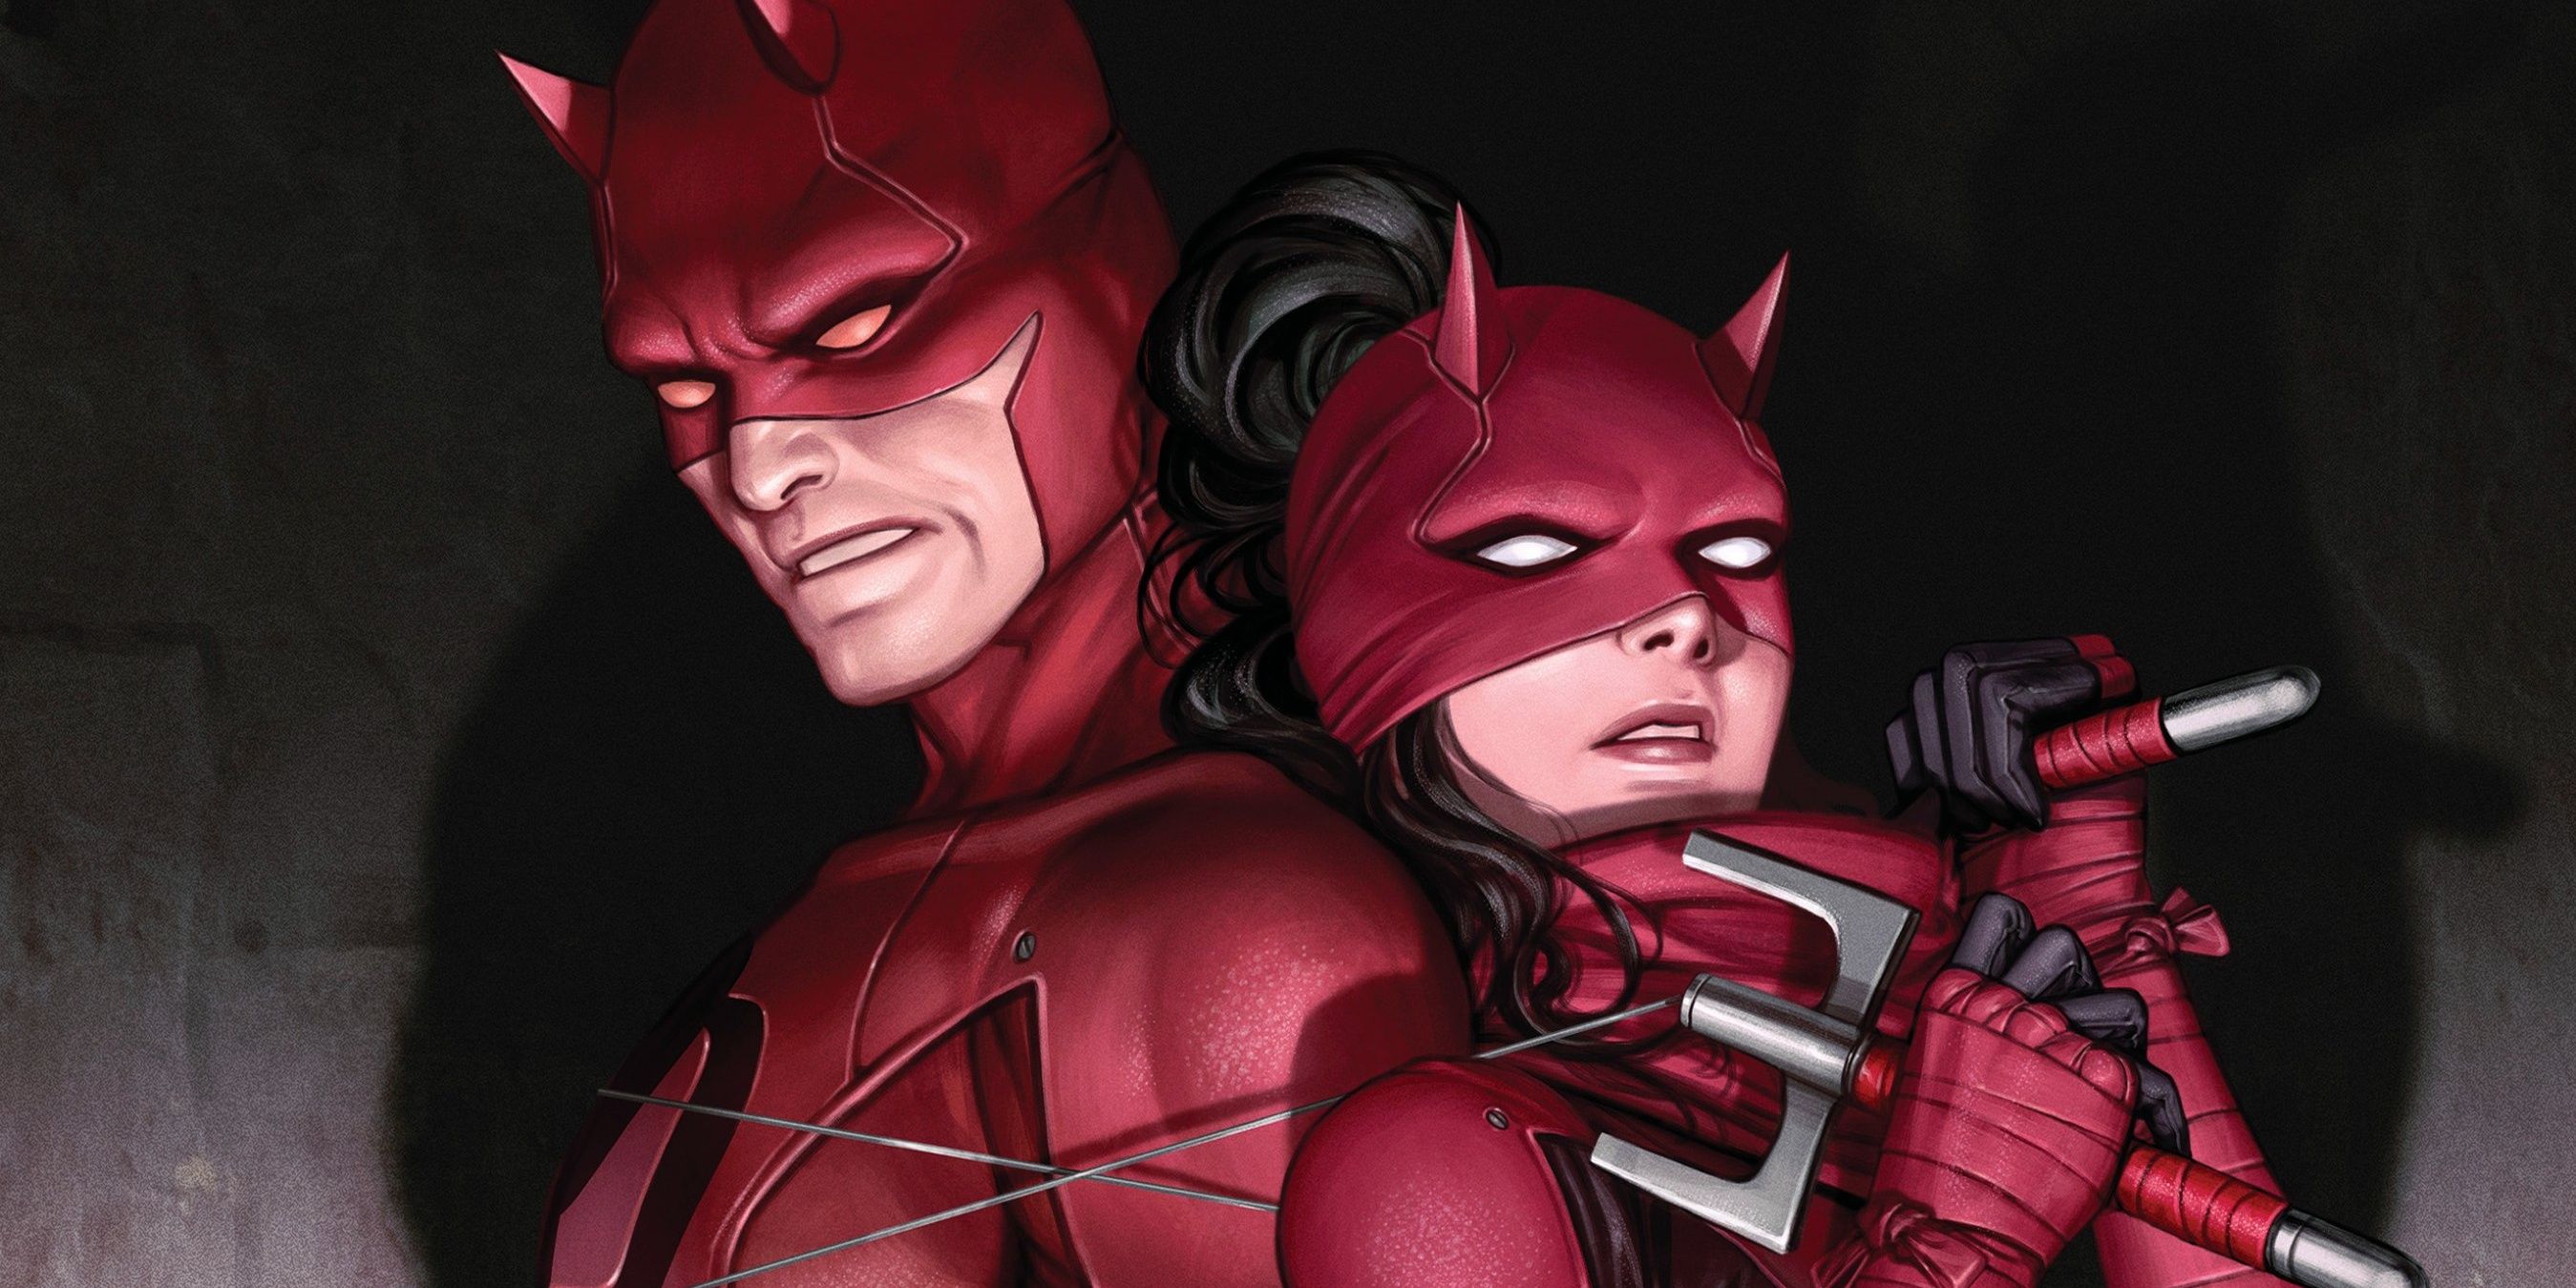 Elektra Natchios and Matt Murdock as Daredevil on the cover of Devil's Reign Omega (2022)